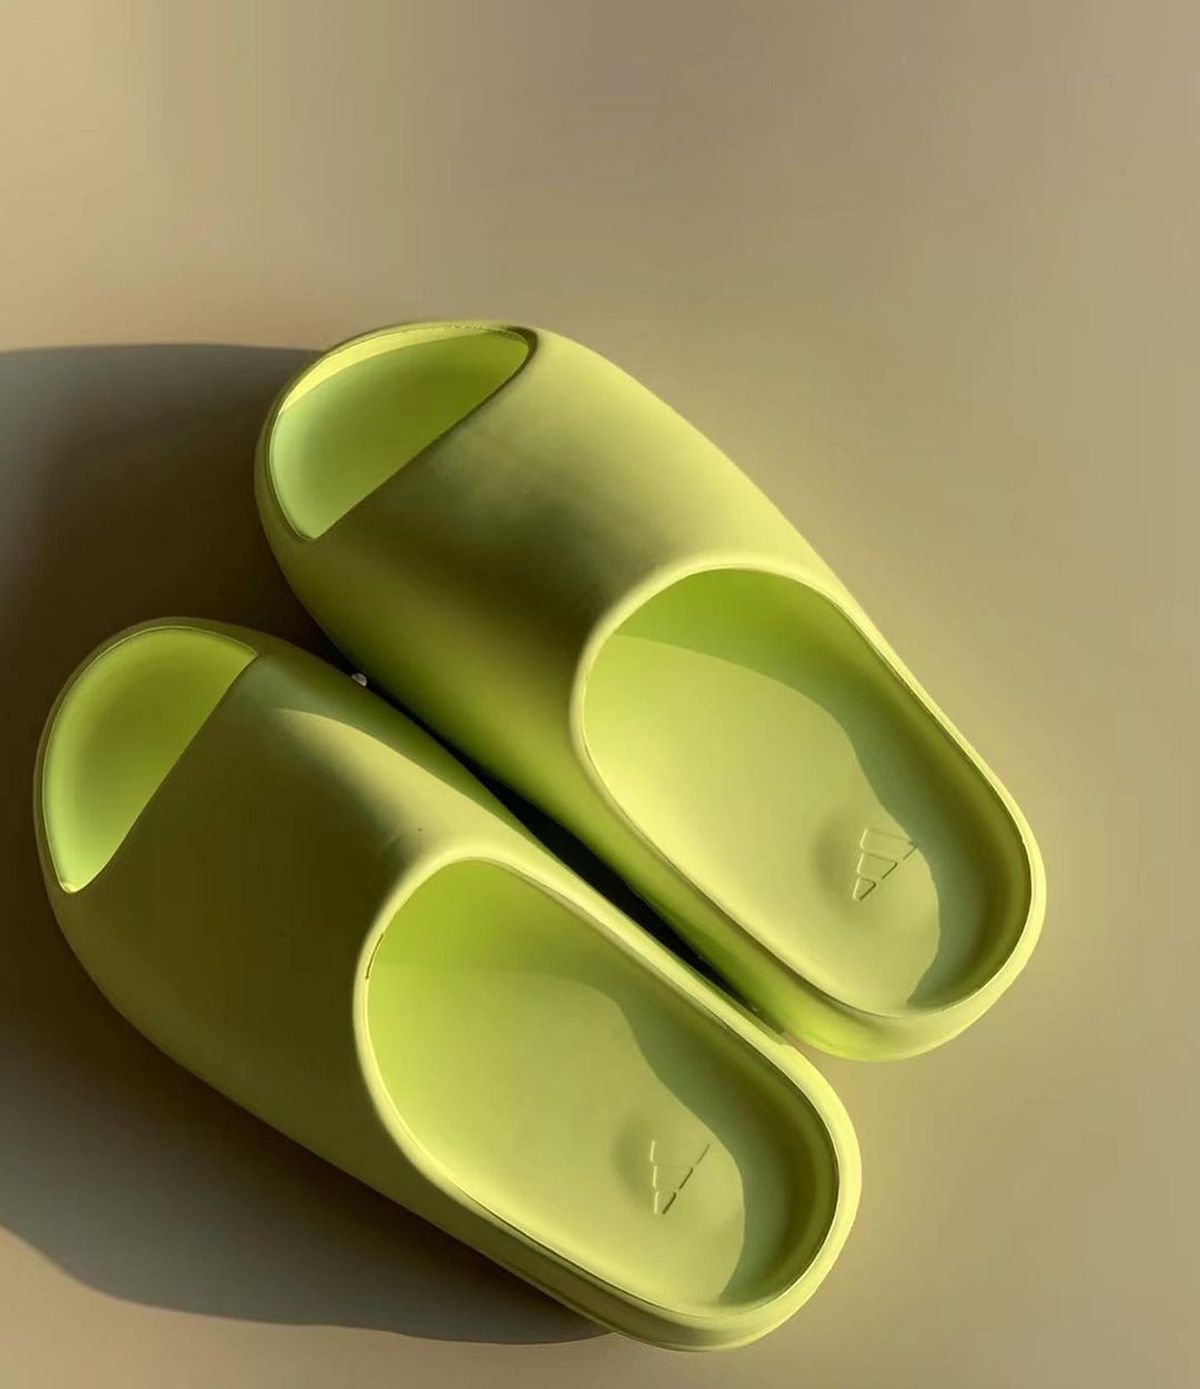 Where to Buy the YEEZY Slide “Glow Green” Restock | House of Heat°